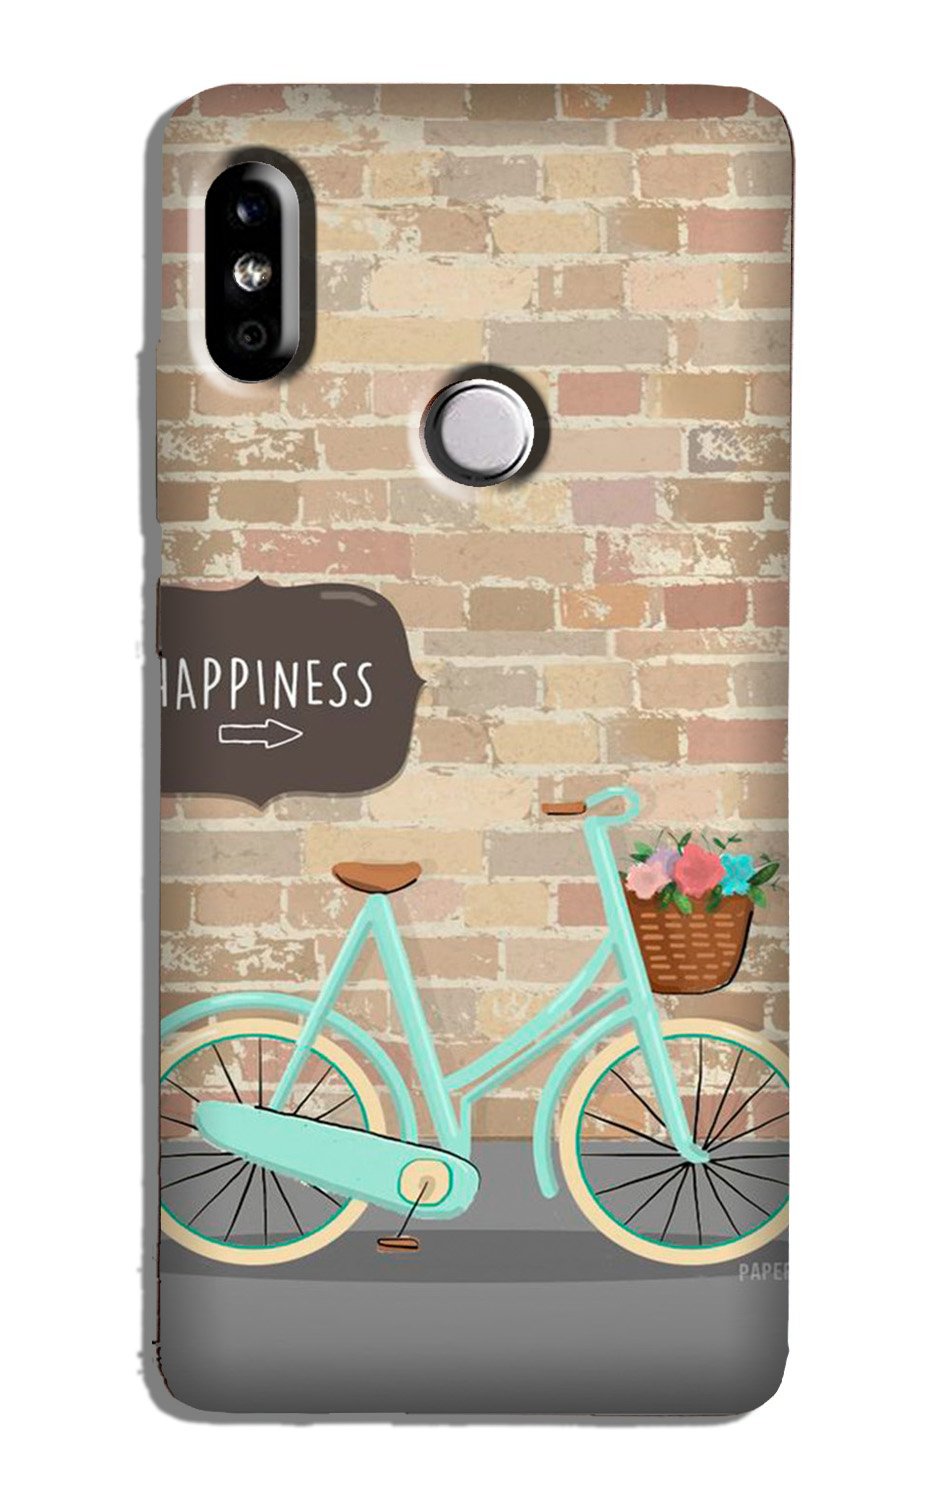 Happiness Case for Xiaomi Redmi Note 7/Note 7 Pro